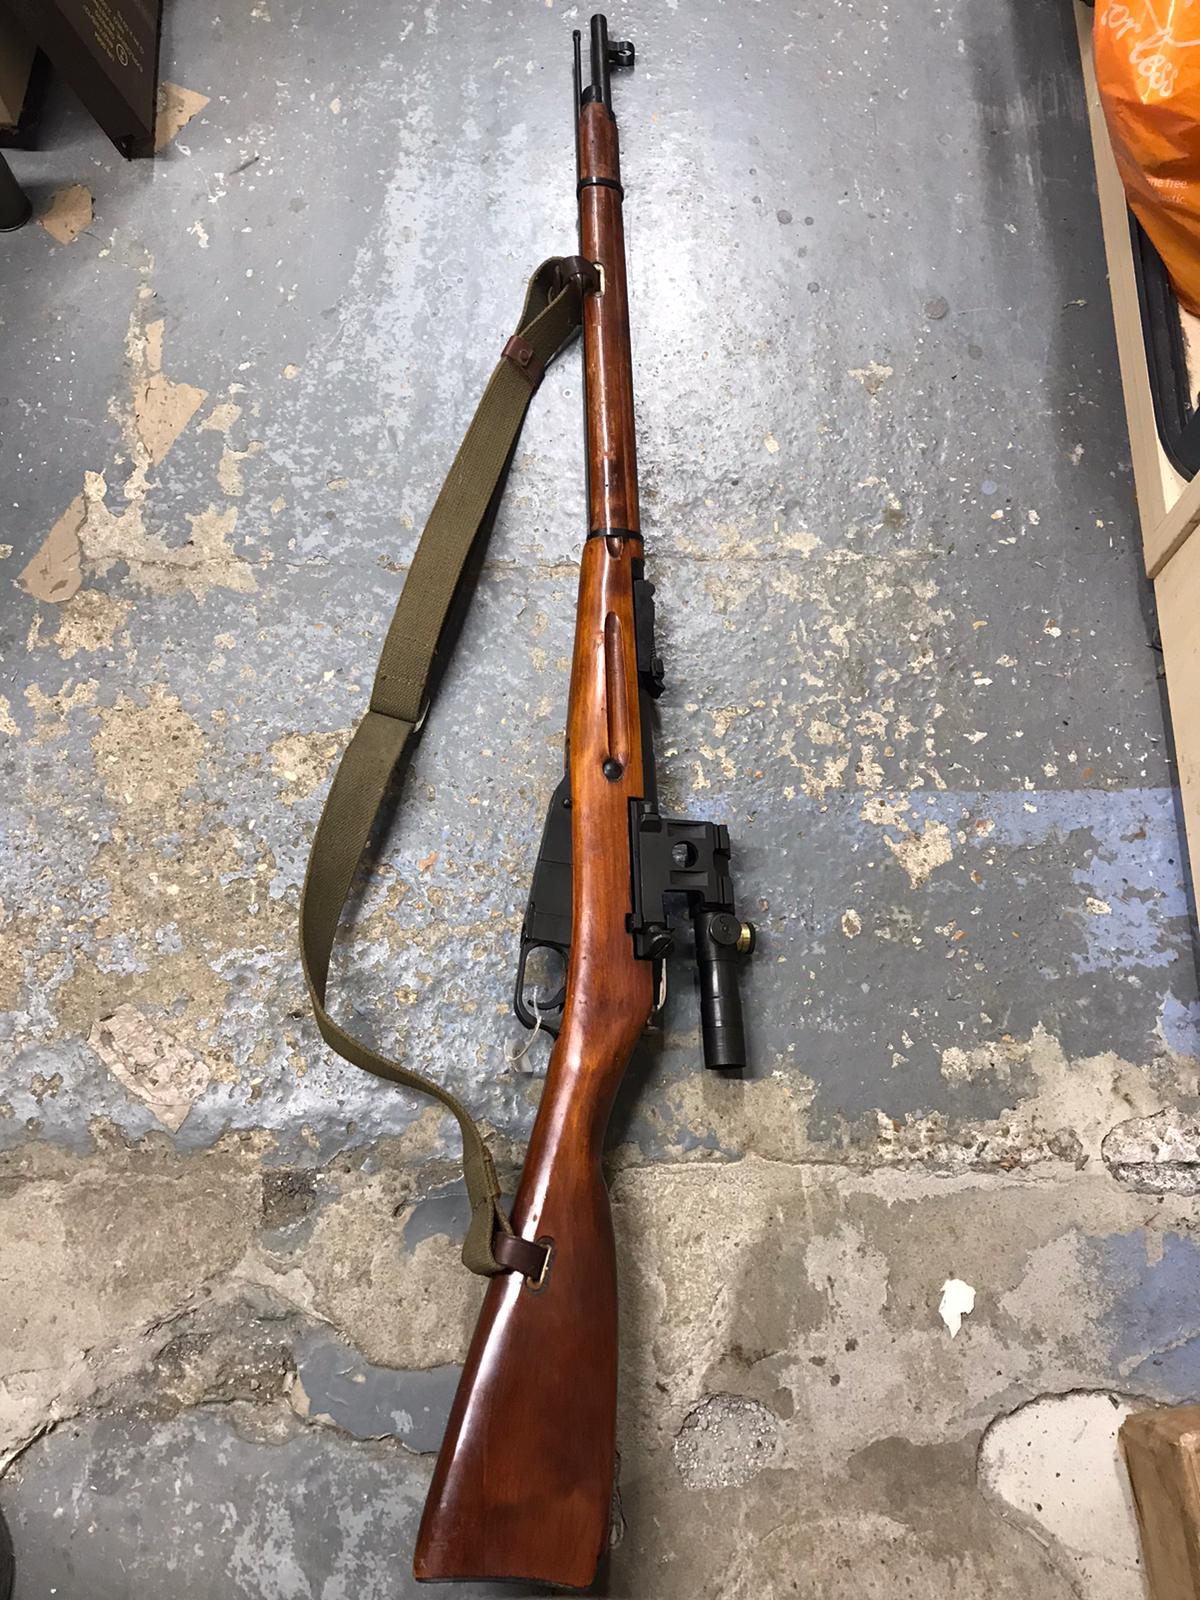 Mosin Nagant Sniper ... authentic, or reconstructed? | Gunboards Forums